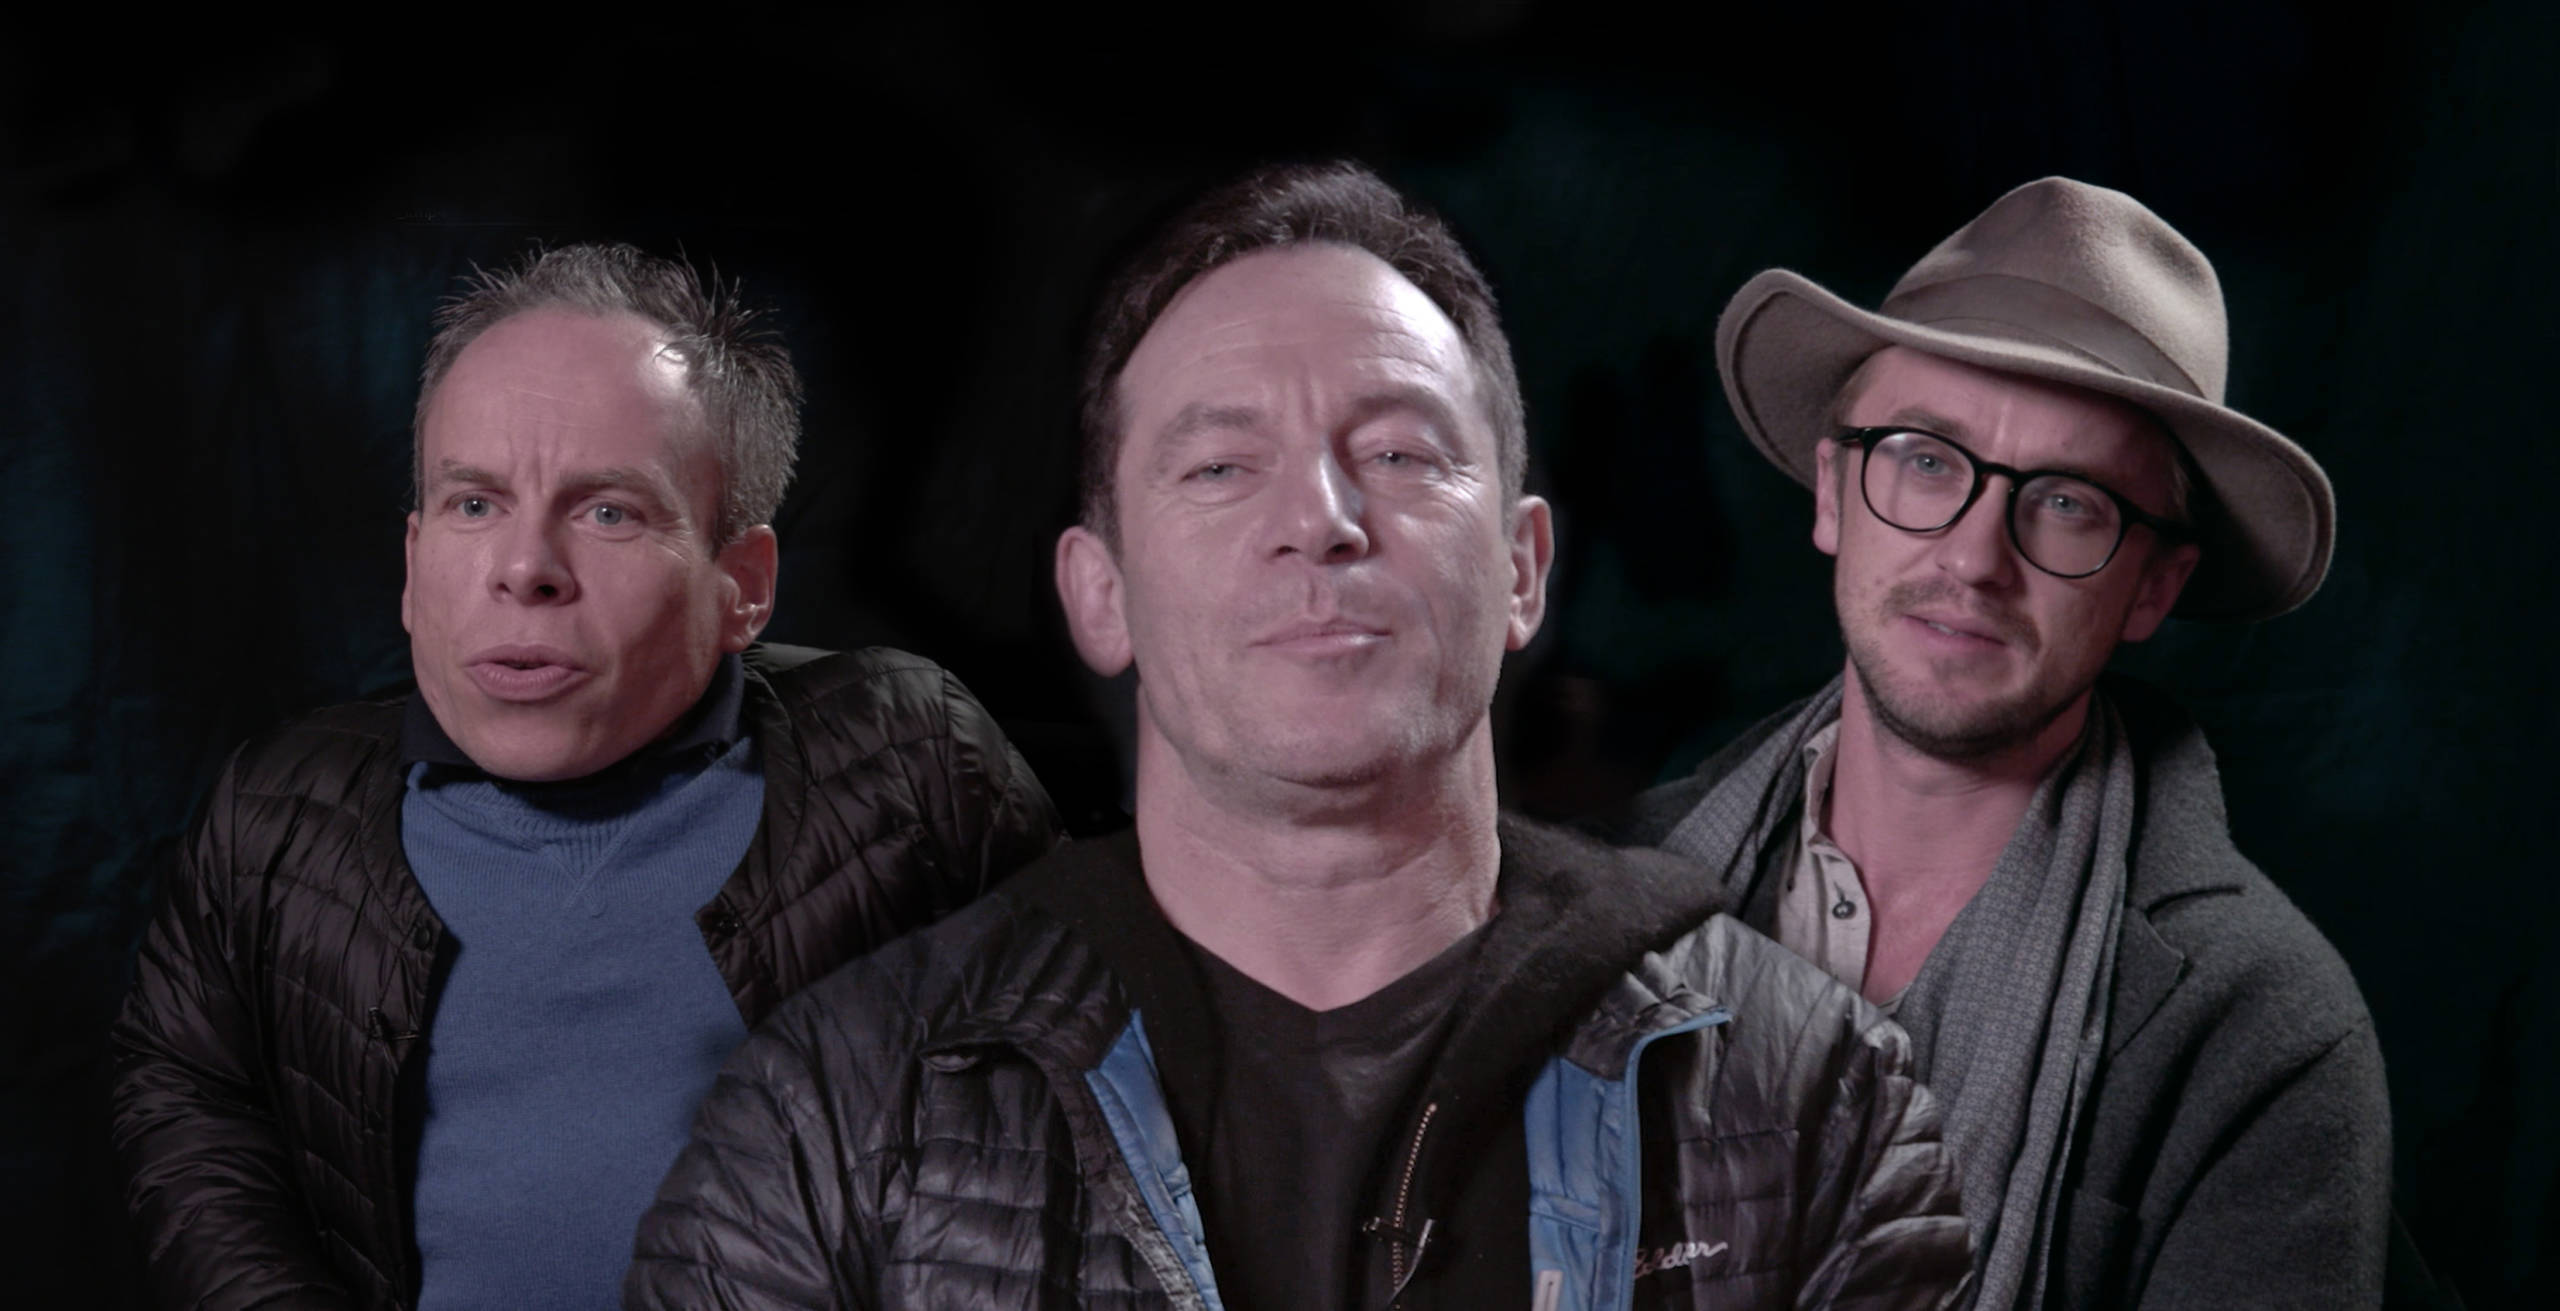 Warwick Davis, Jason Isaacs and Tom Felton discuss their favourite spells and classes